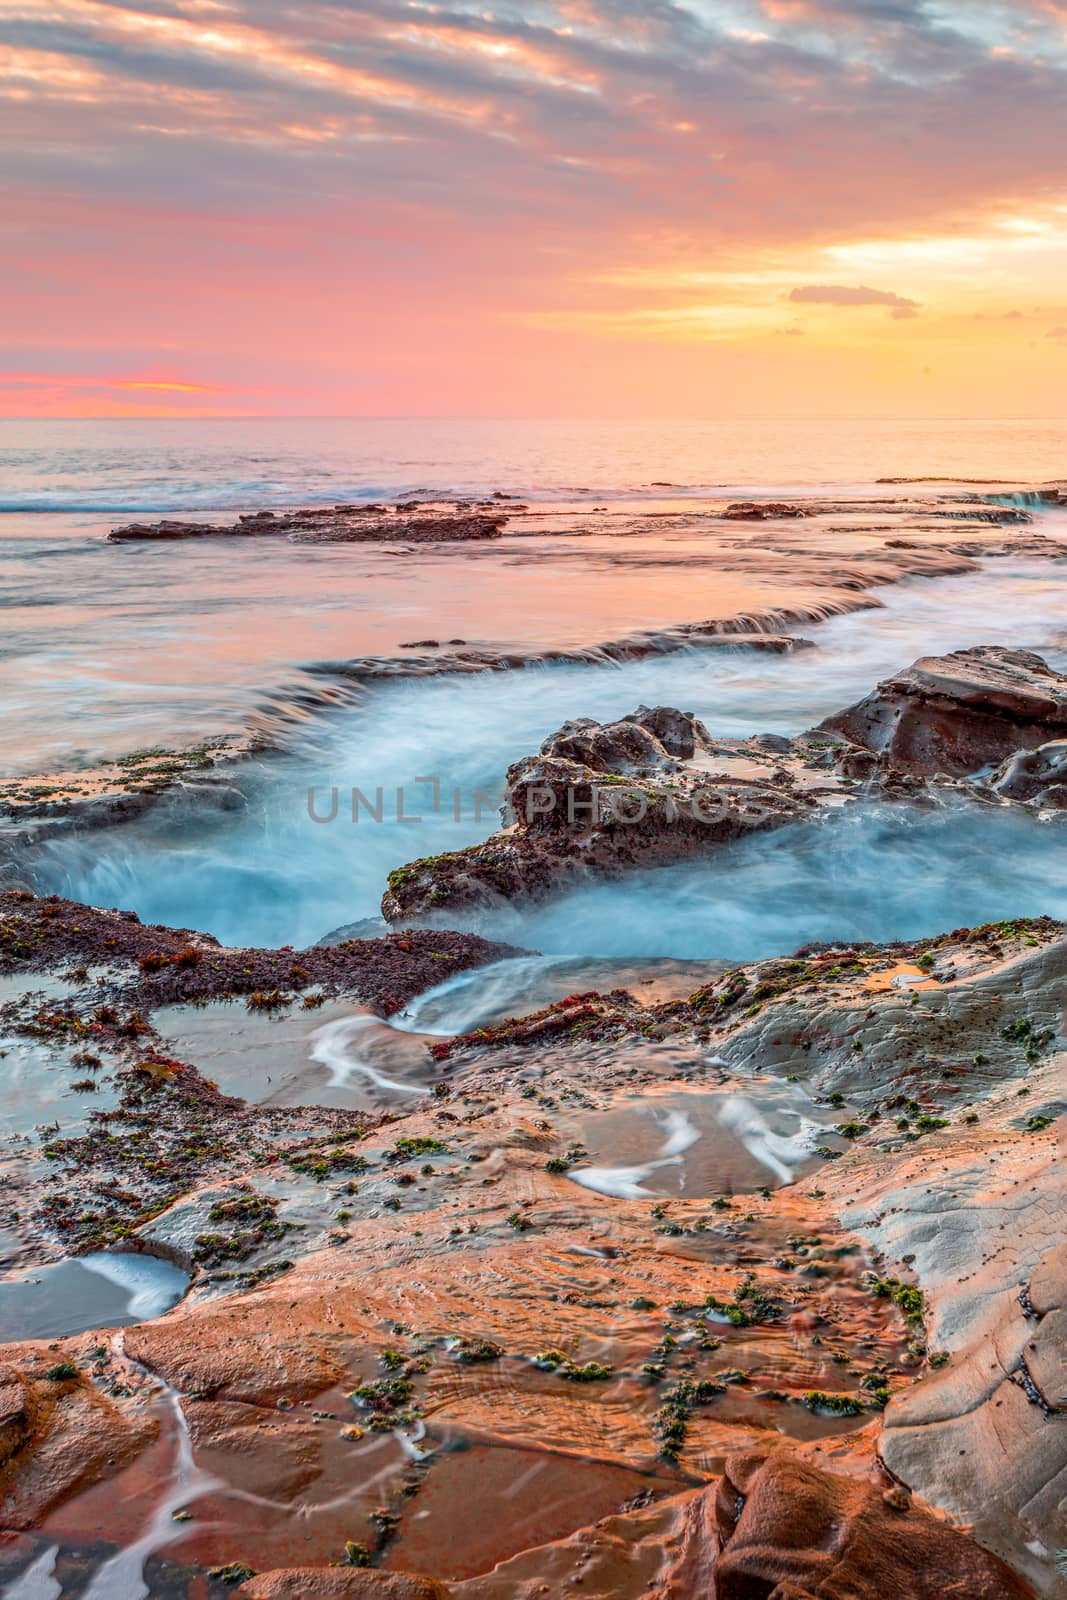 Ocean tide flowing into coastal channels eroded over time, the beautiful sunrise casting warm light into the sky and rock shelf